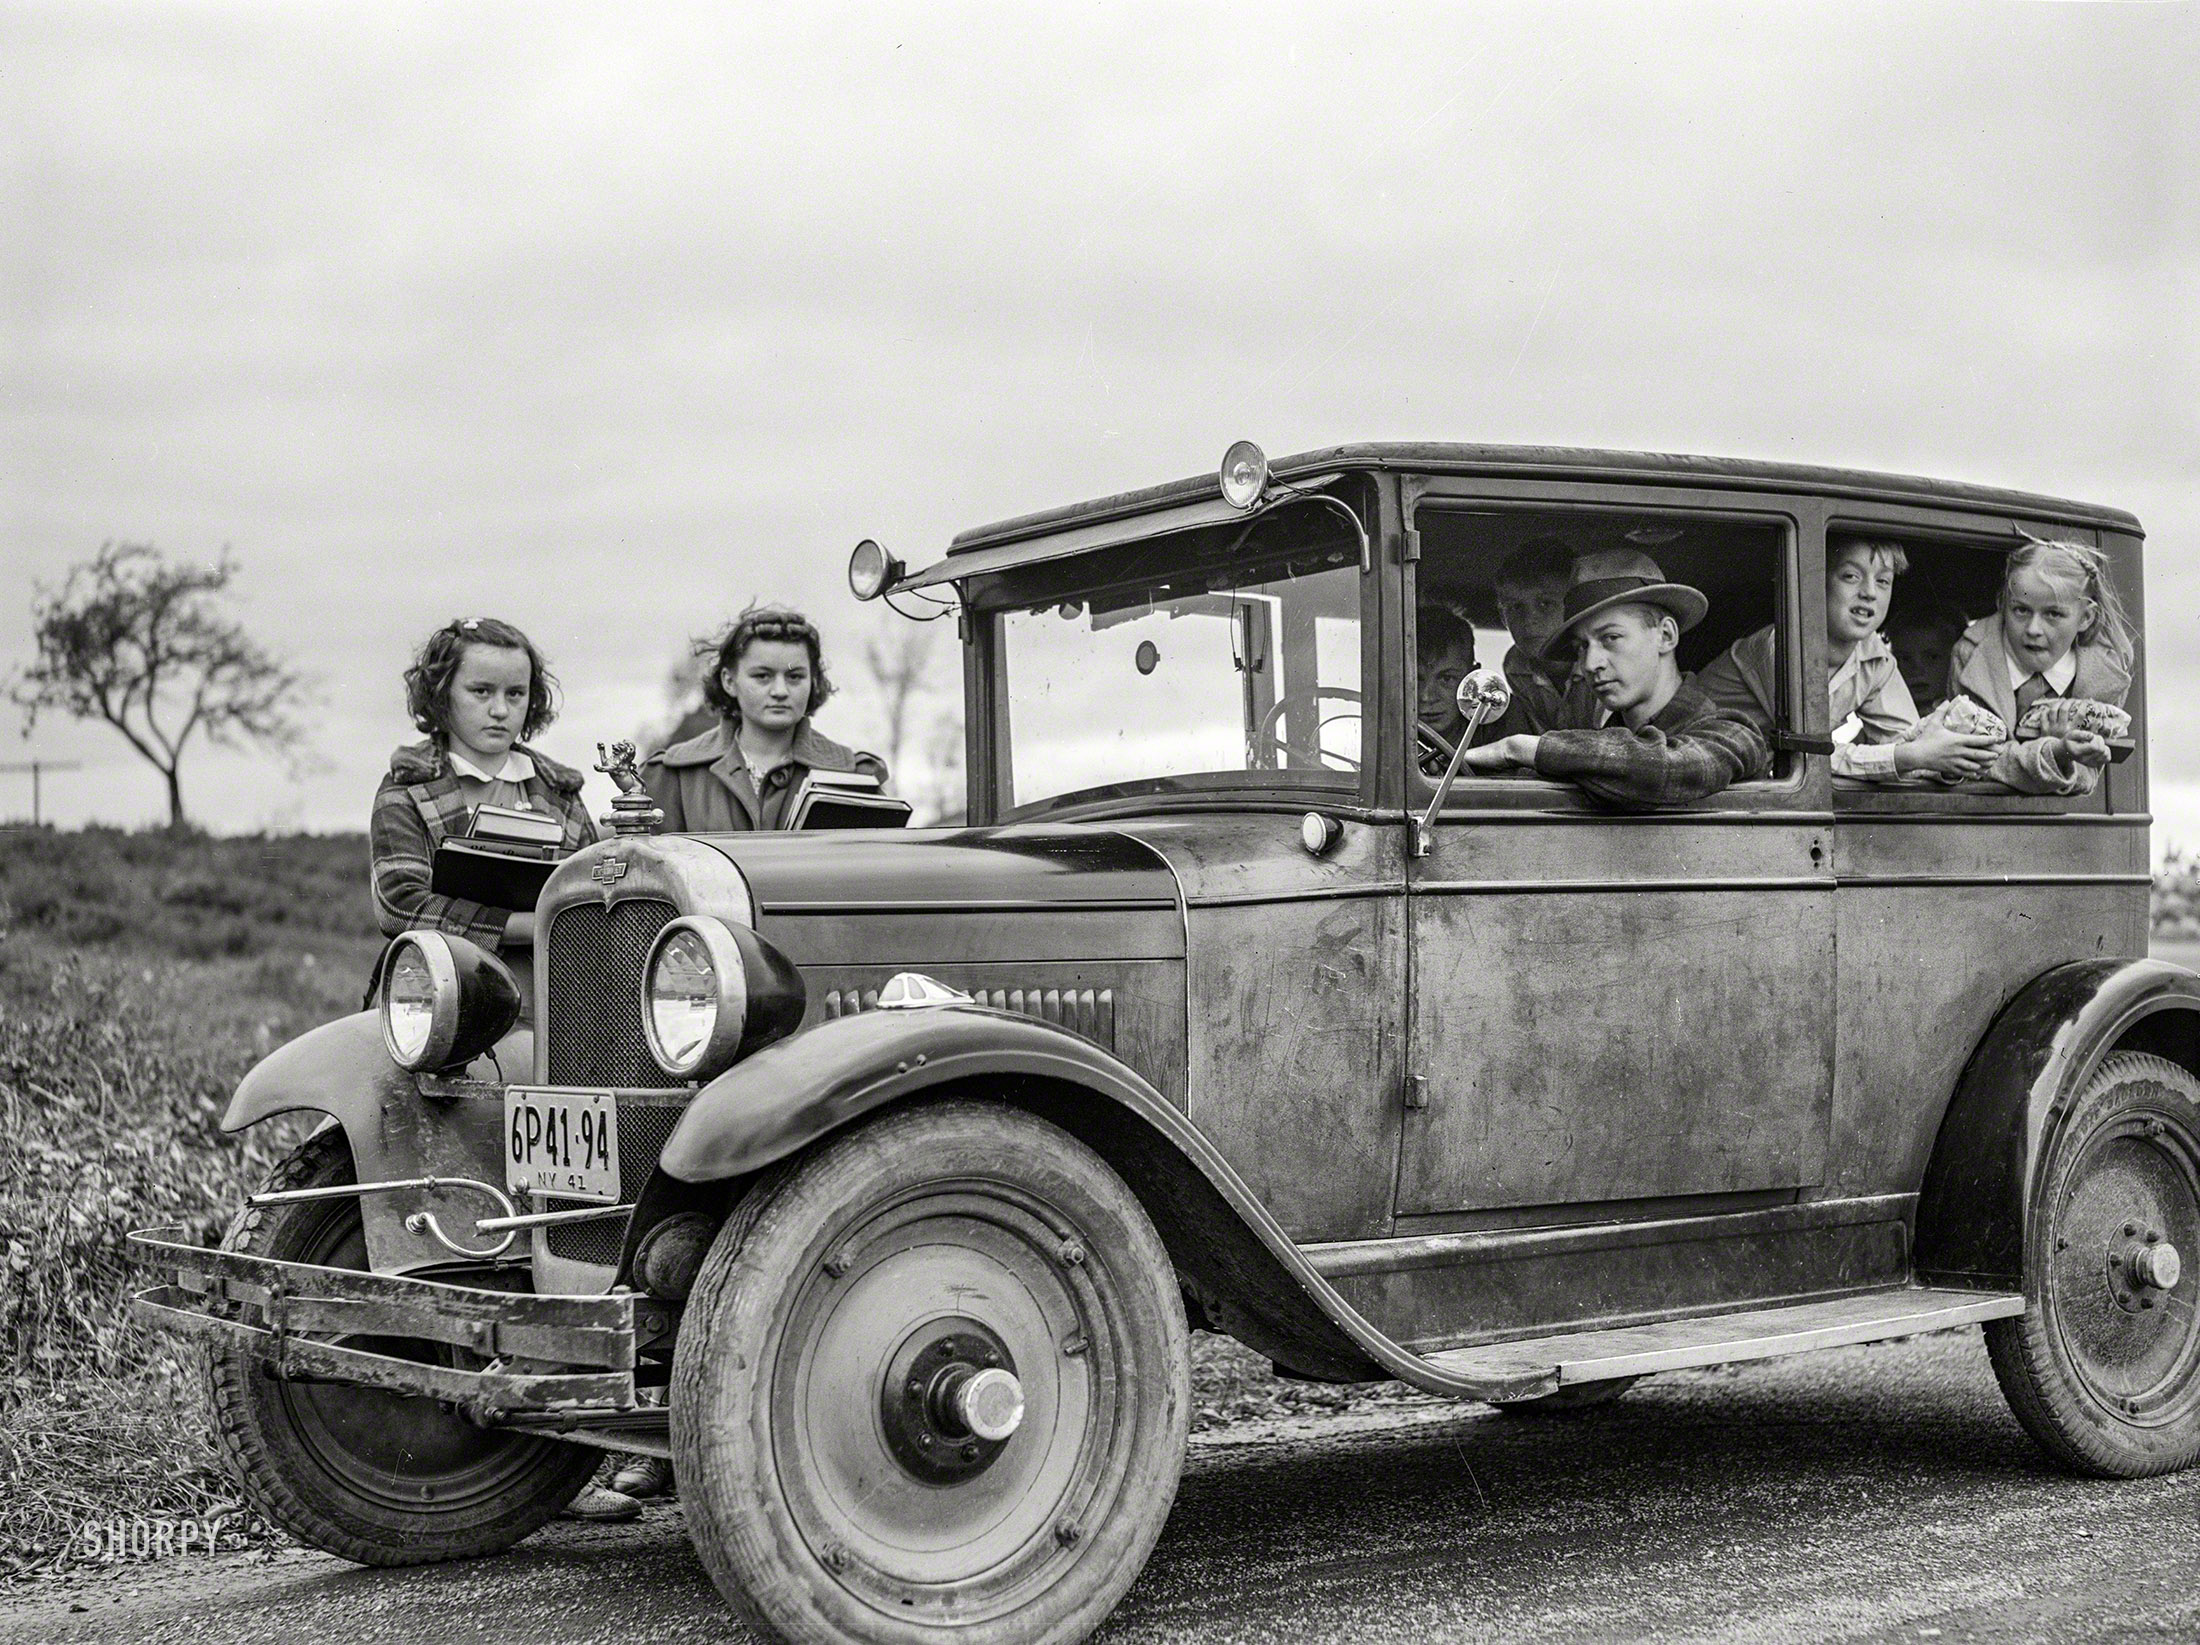 October 1941. "Children of Dan Sampson, who moved out of the Pine Camp expansion area in August, waiting in the family car for the school bus near South Rutland, New York." Medium format negative by Jack Delano. View full size.